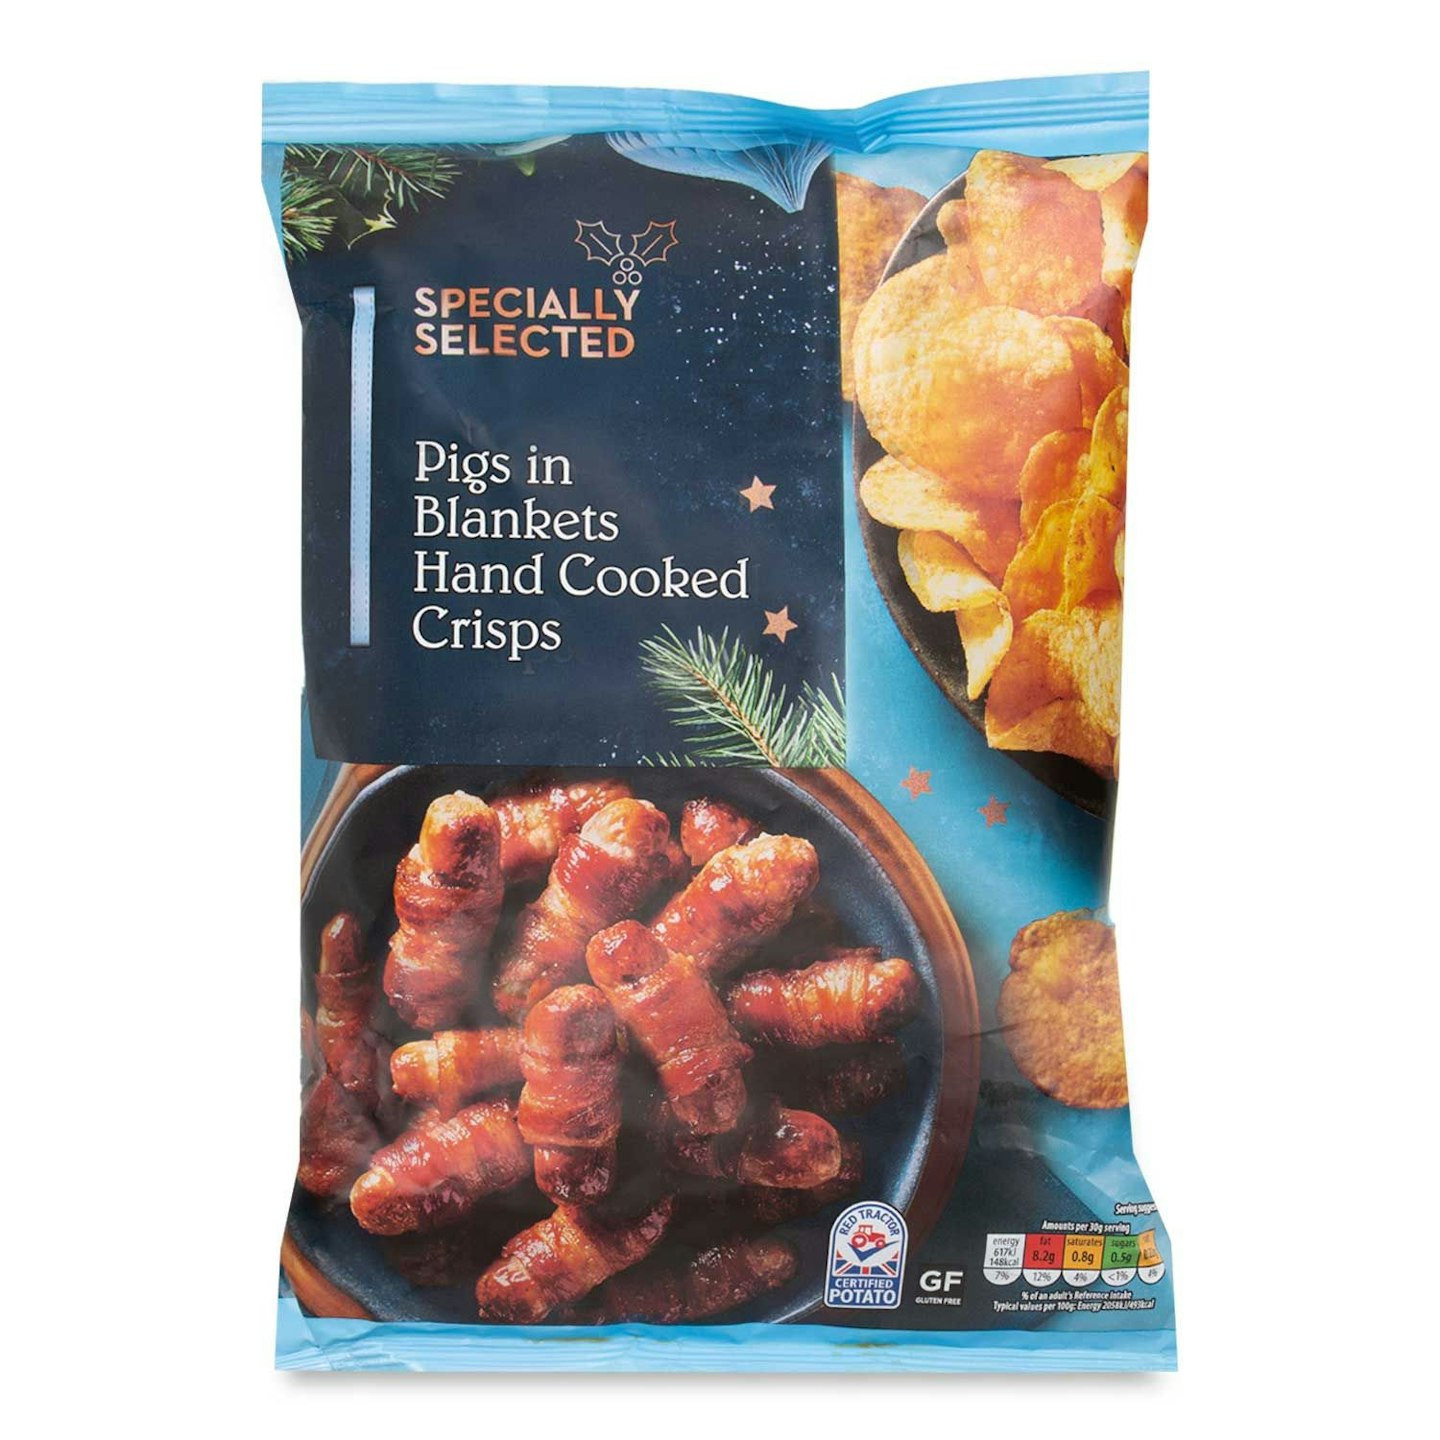 Aldi, Specially Selected Pigs In Blankets Hand Cooked Crisps, £1.05